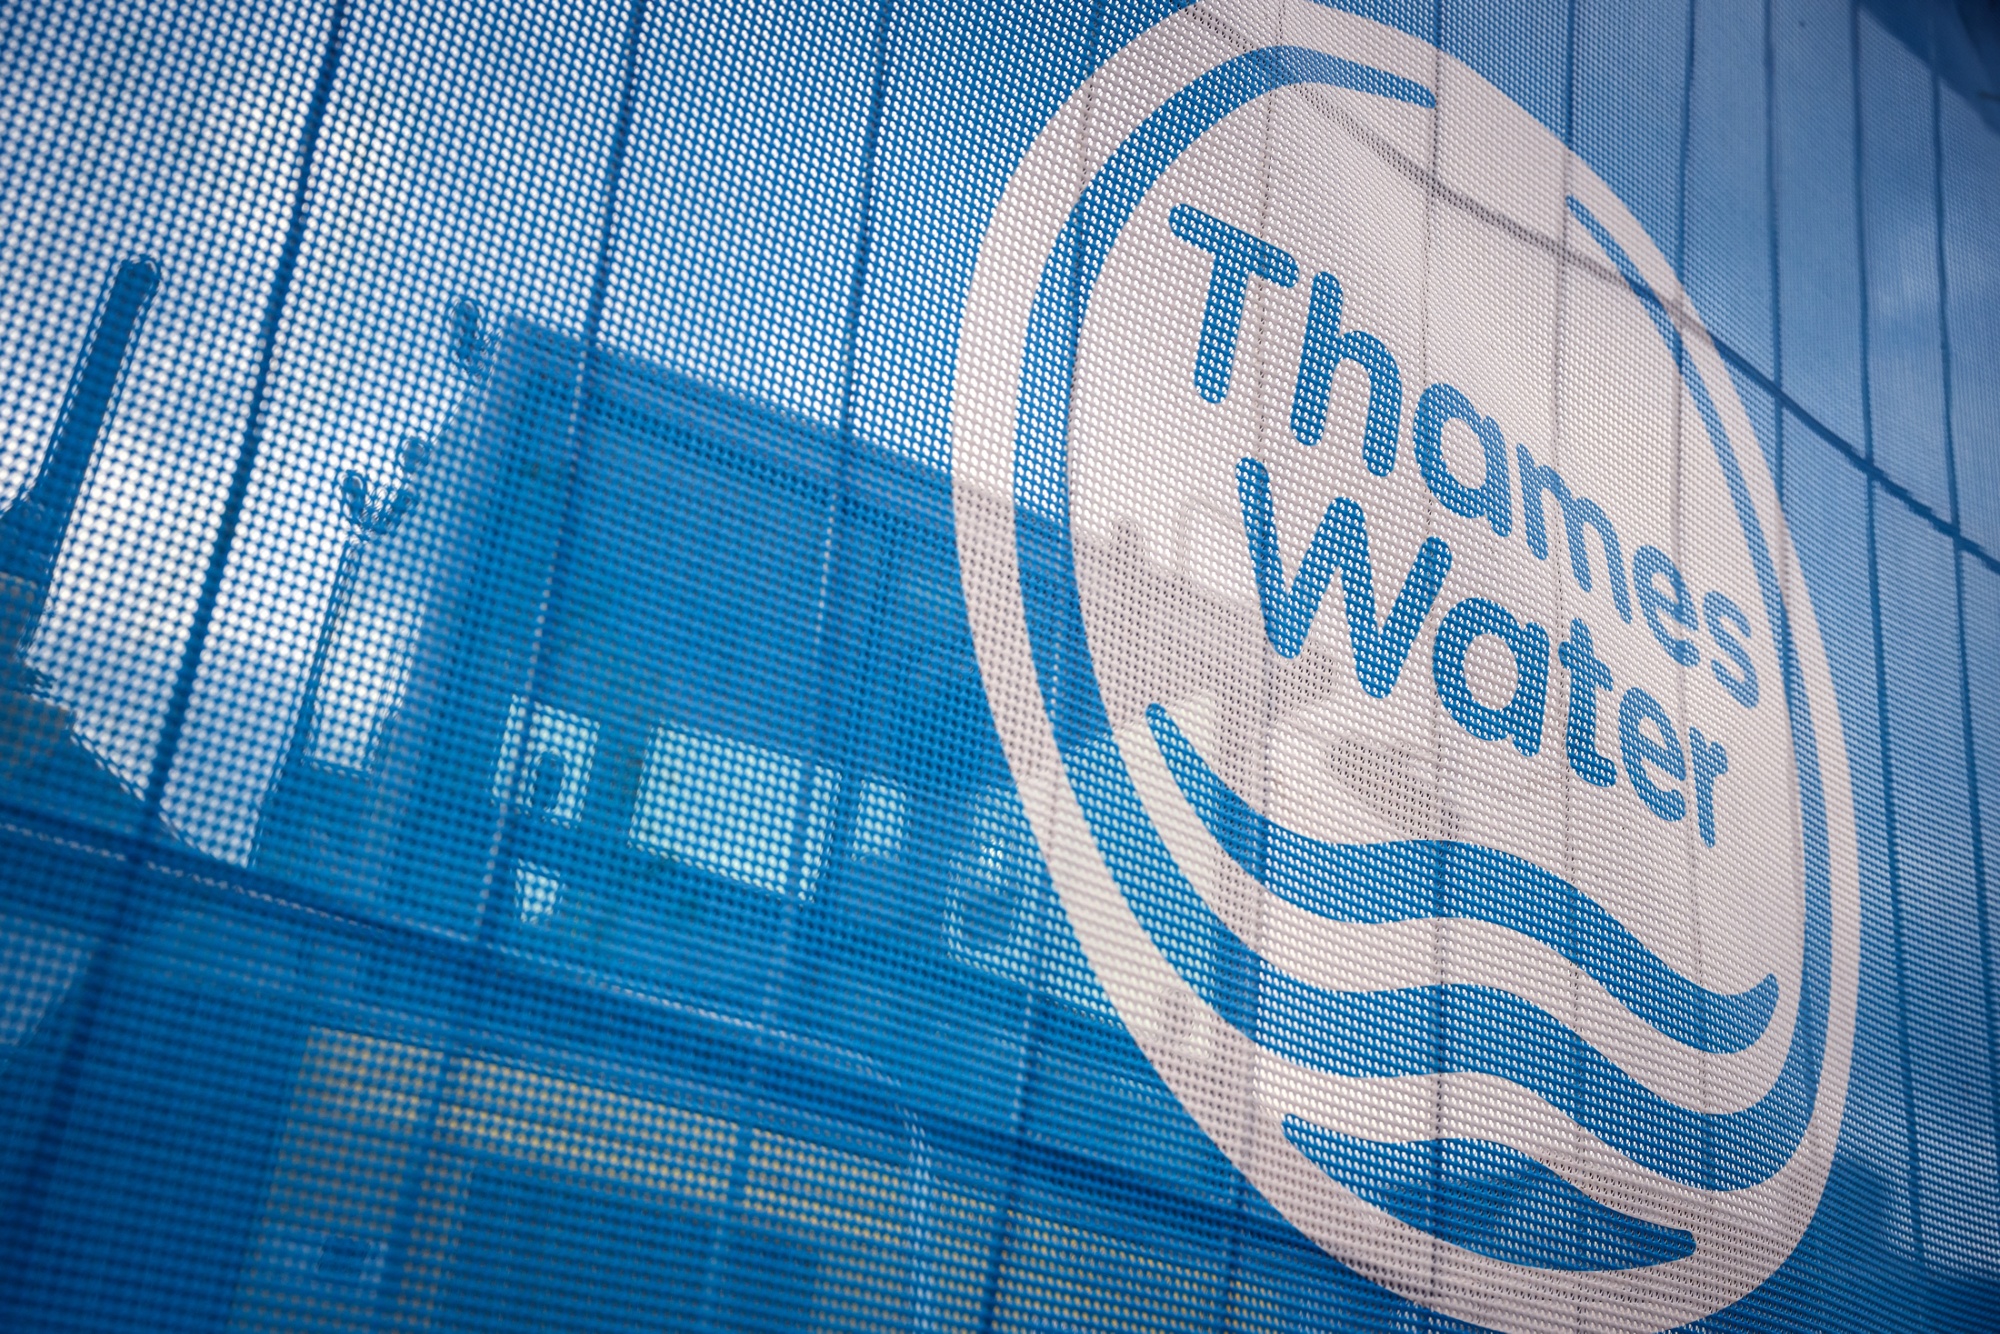 Thames Water supplies a quarter of water and sewage services to England, including London.